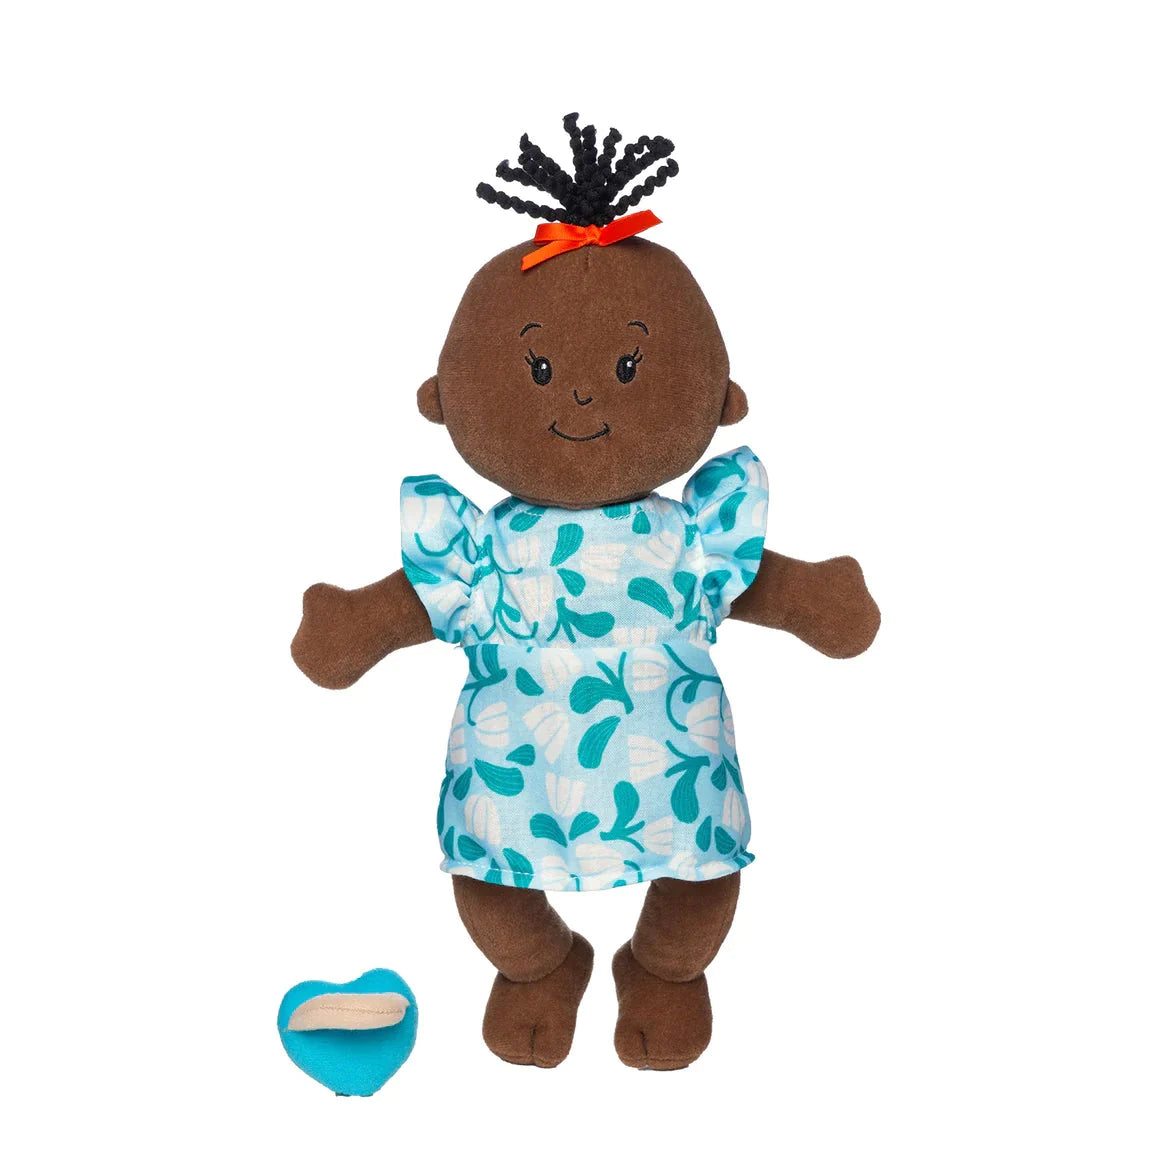 Wee Baby Brown Doll With Black Wavy Tuft Cover